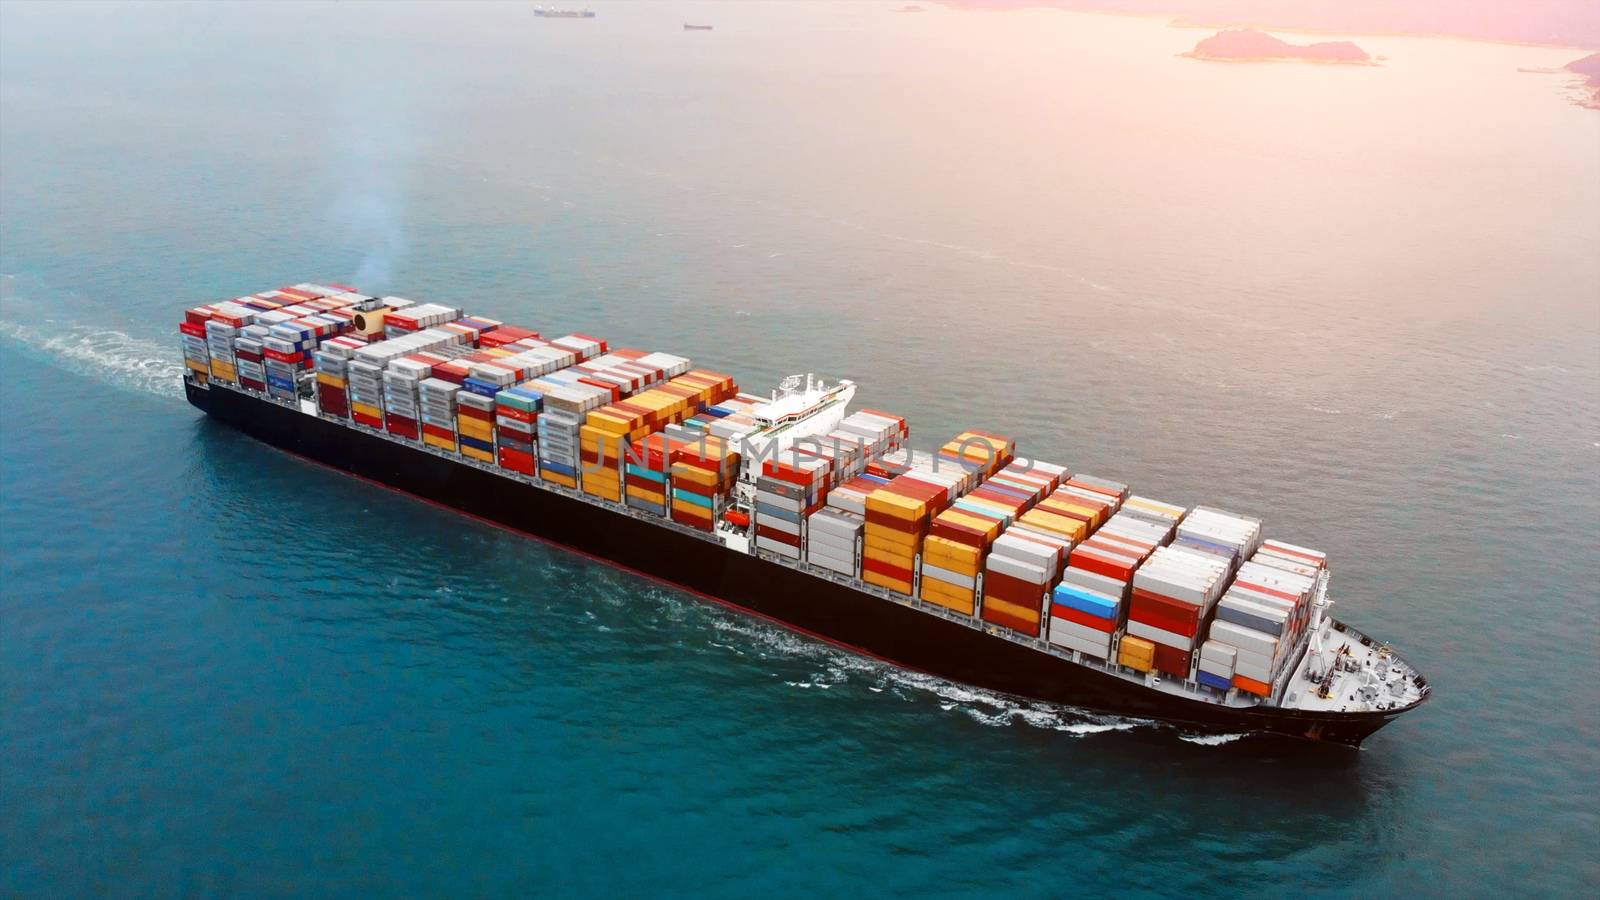 Aerial view of cargo container ship on ocean.
